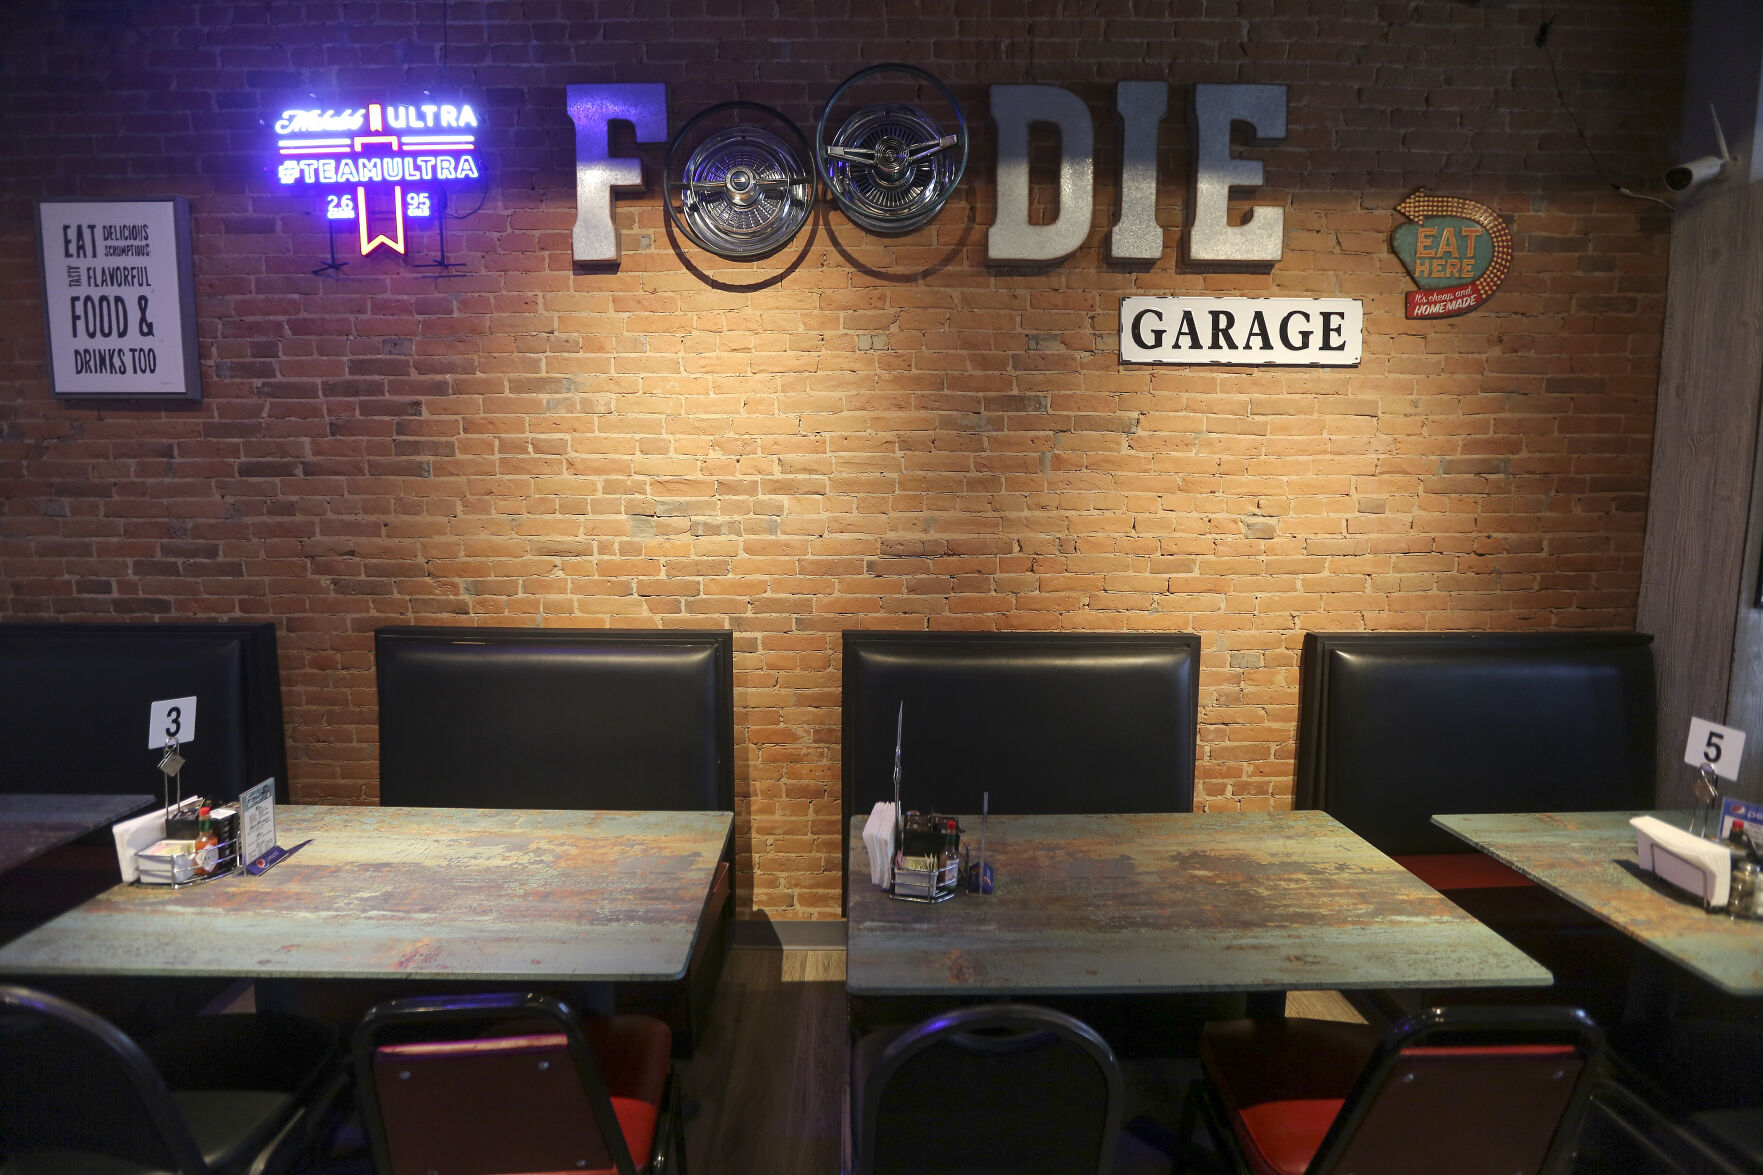 The Foodie Garage Eatery in Dubuque.    PHOTO CREDIT: Dave Kettering